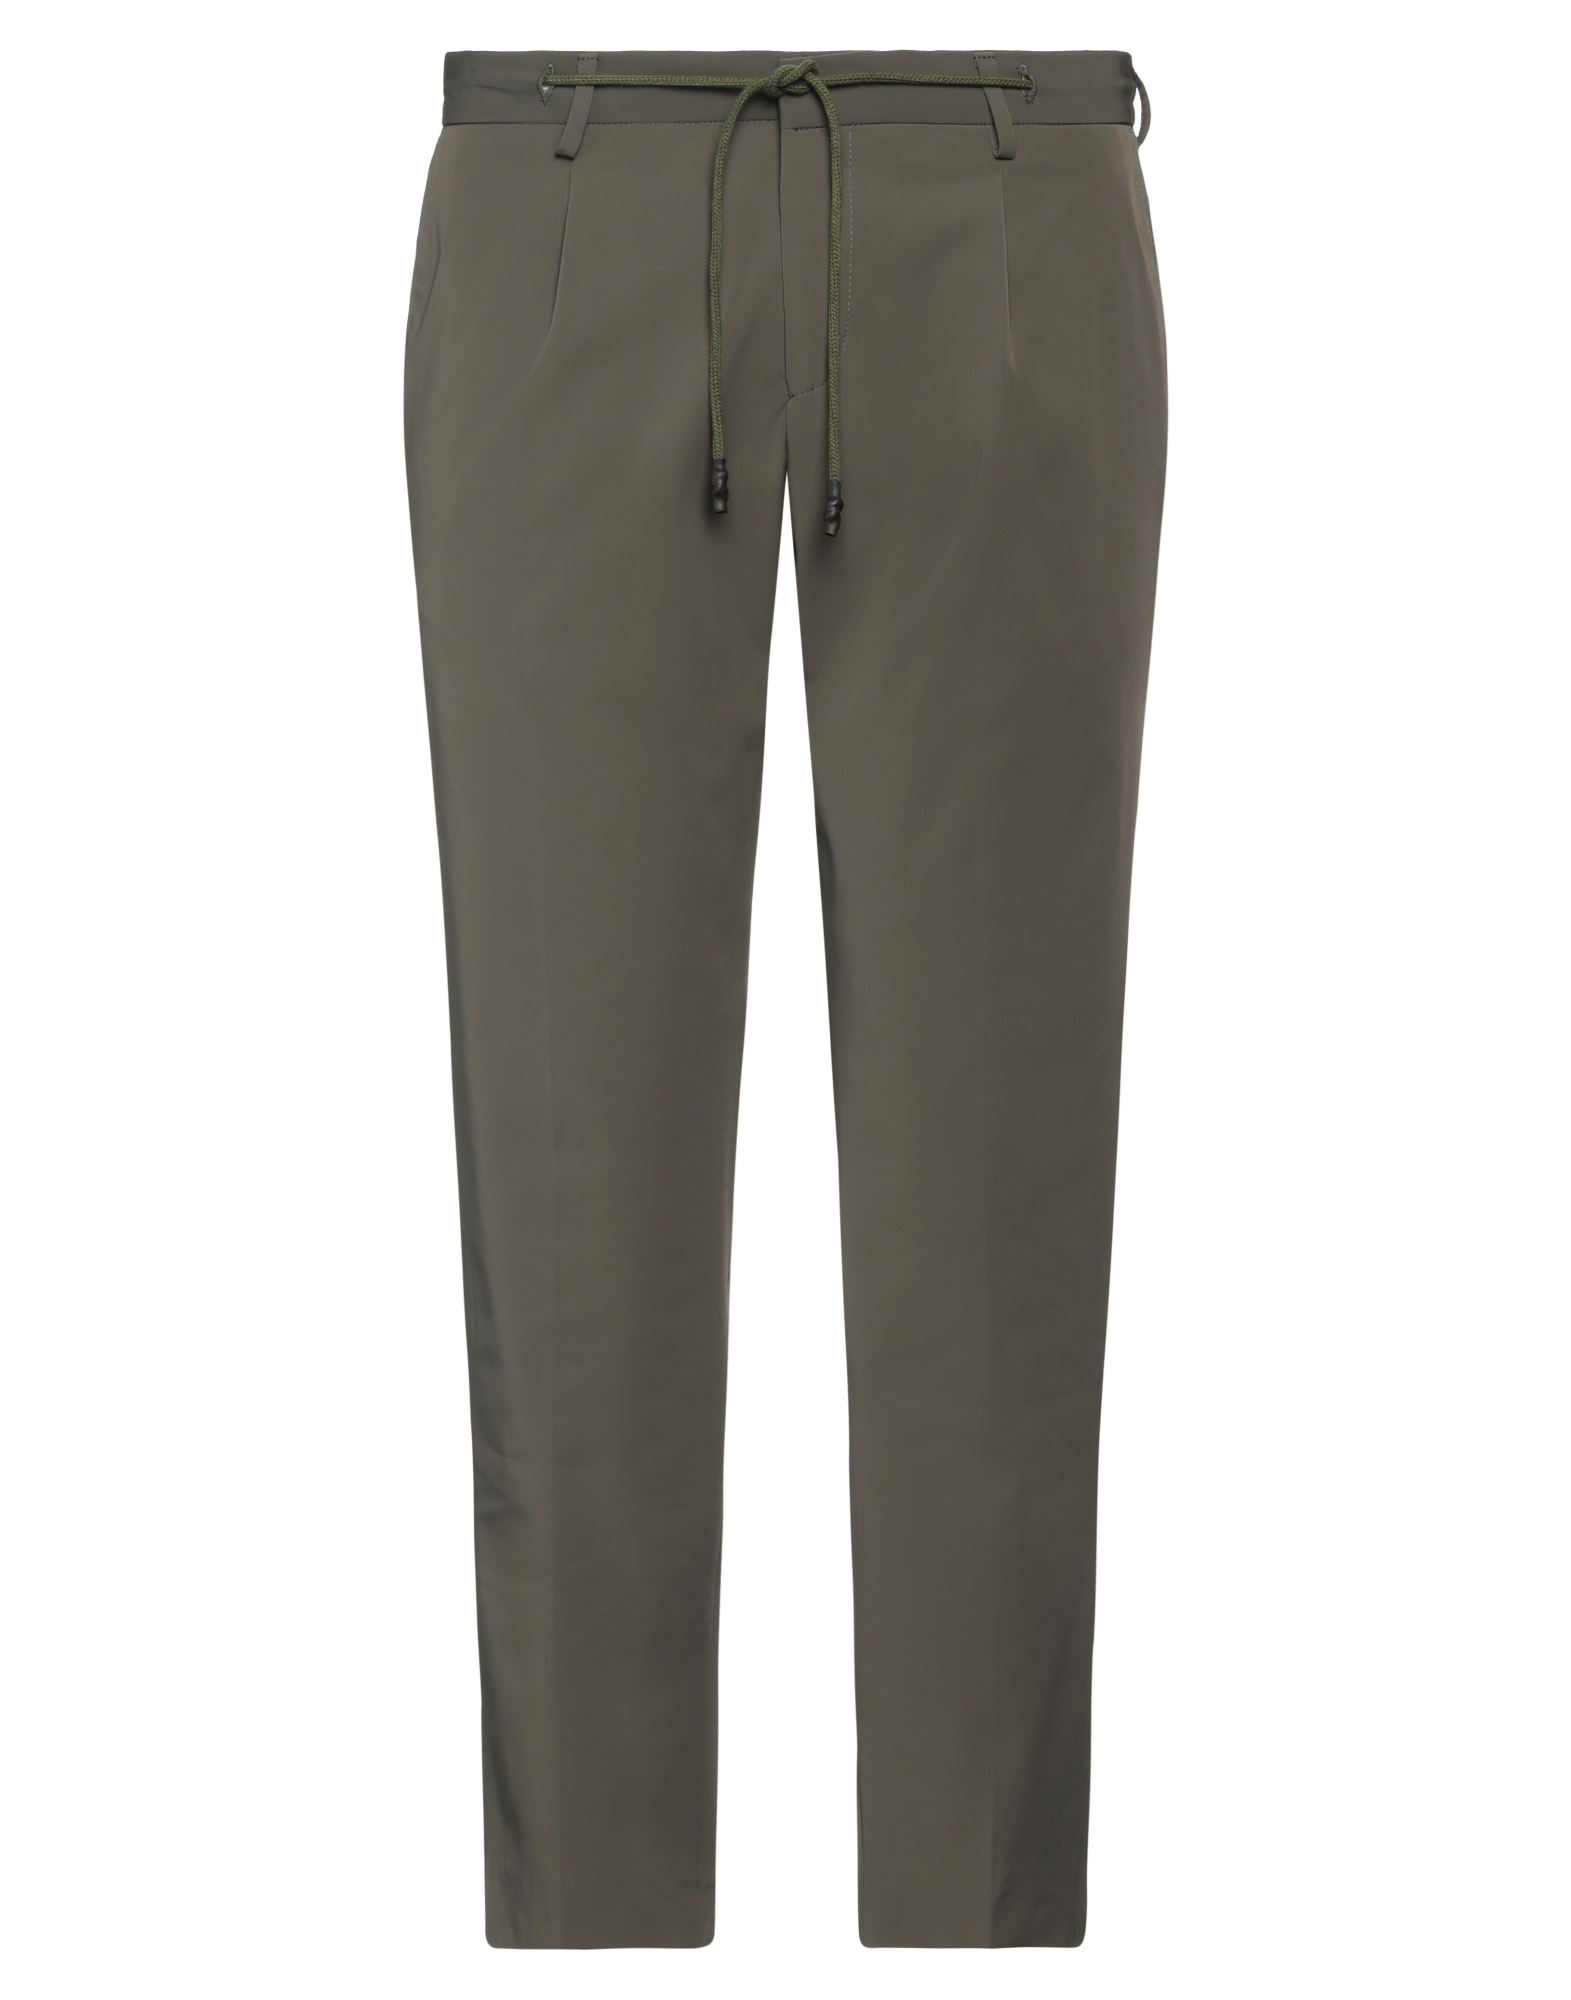 Betwoin Pants In Sage Green | ModeSens